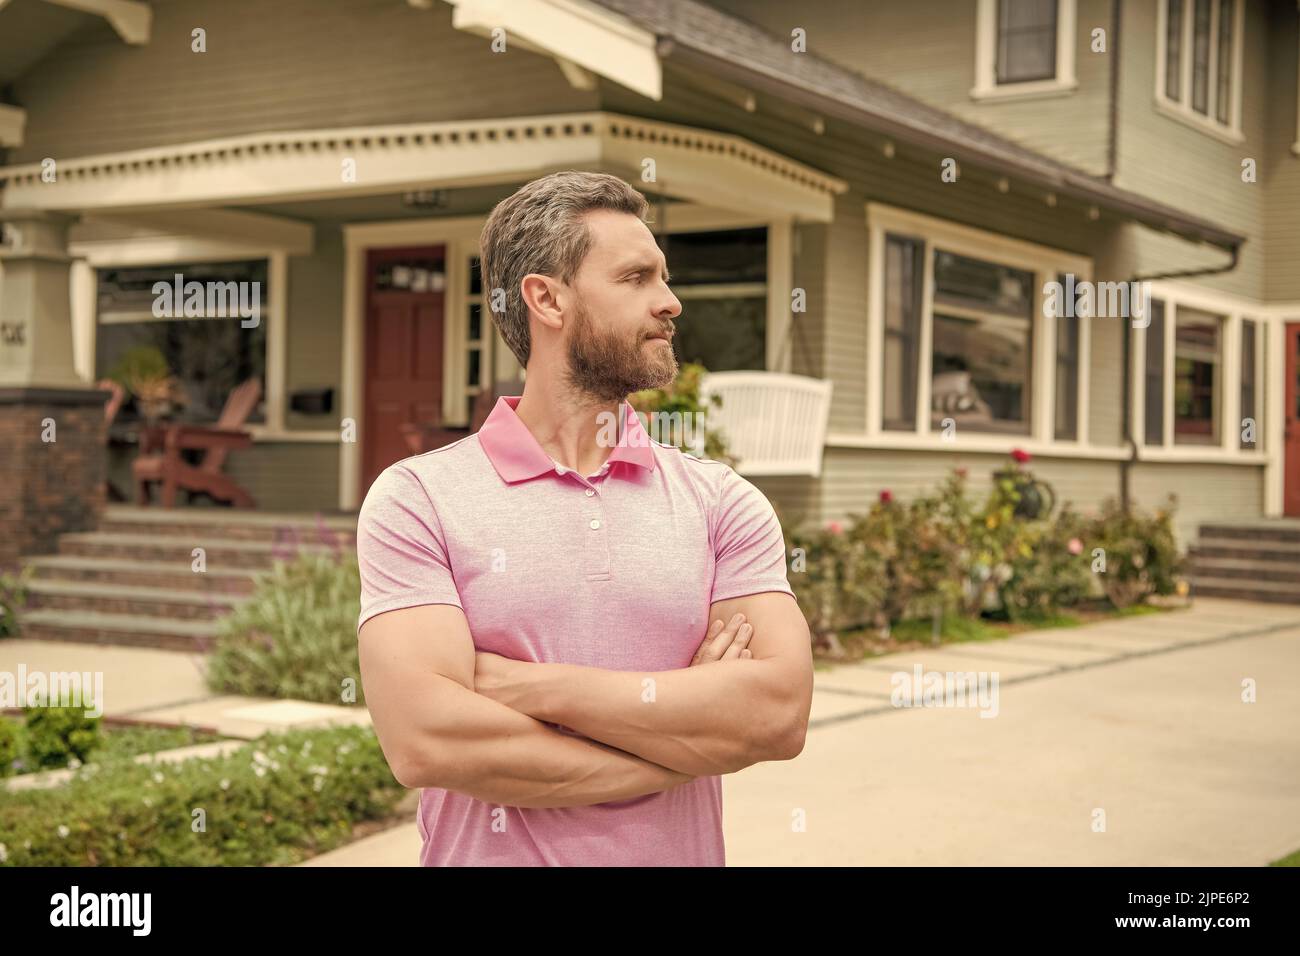 real estate agent sell property. realtor in suburb neighborhood. man purchasing house Stock Photo